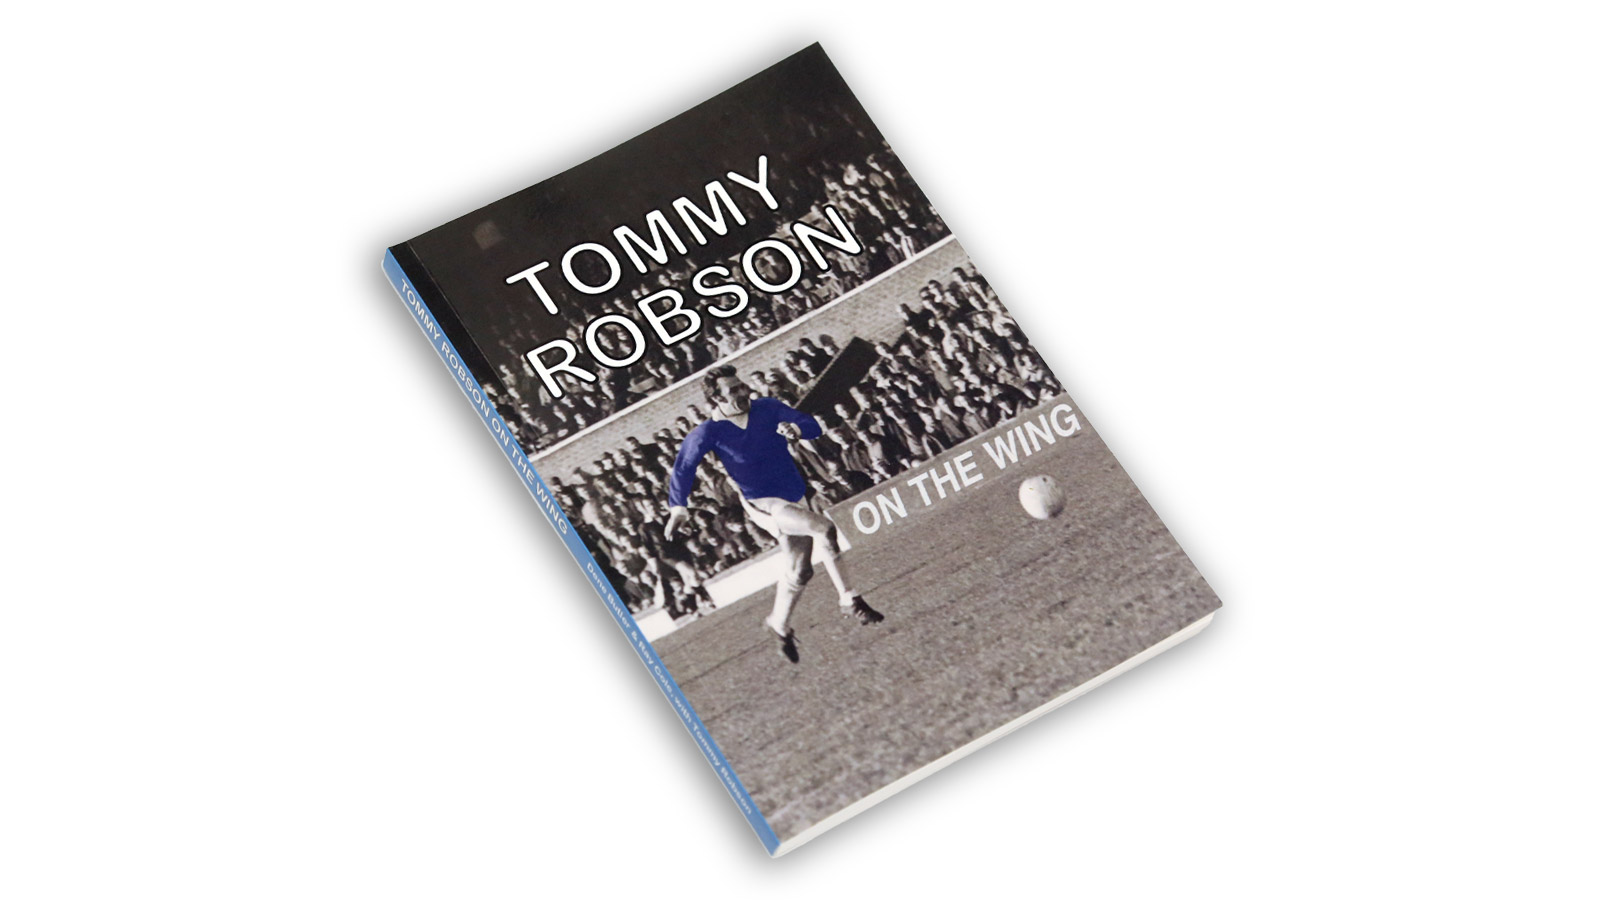 Tommy Robson book